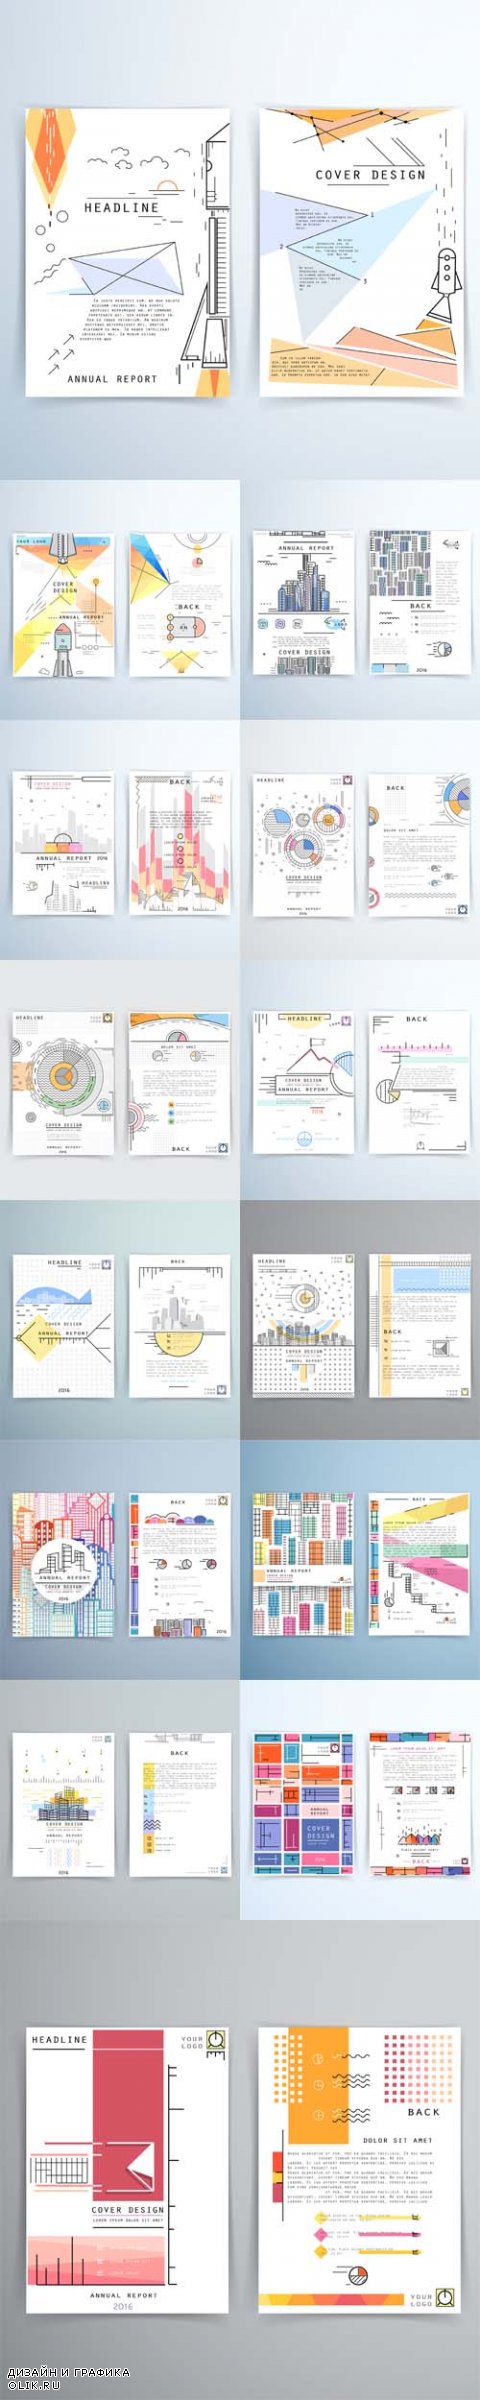 Vector Cover design annual report. Template brochures, flyers, business presentations